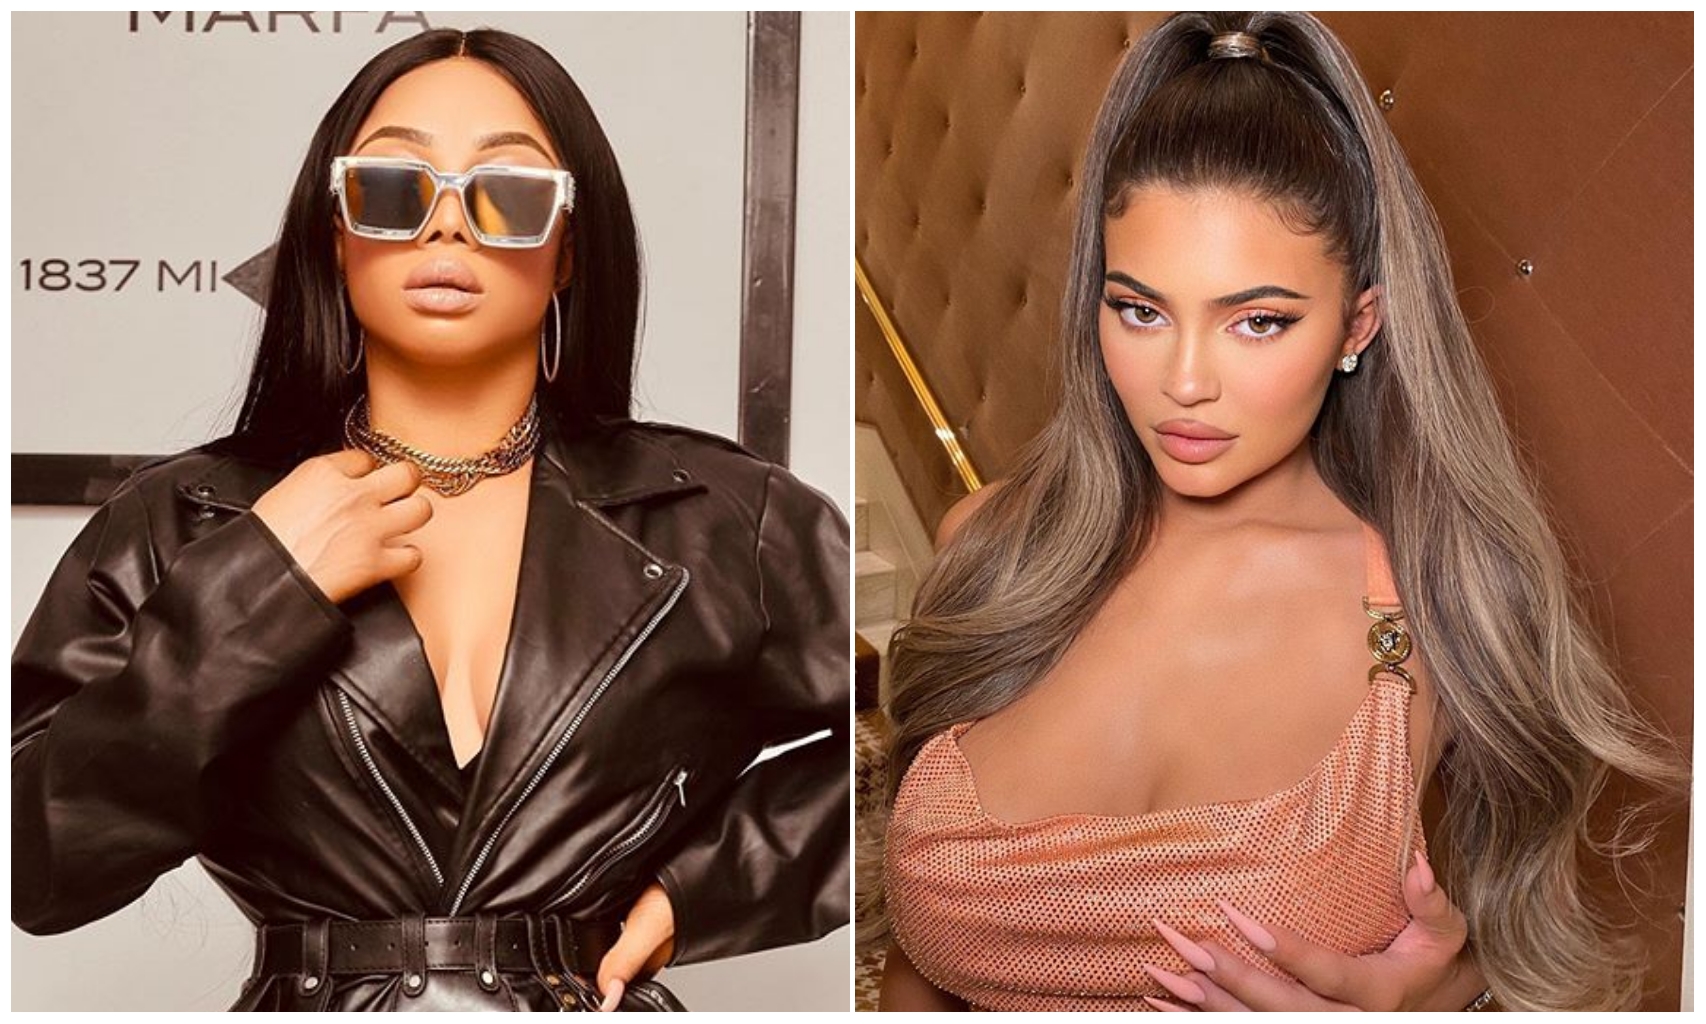 You have a huge influence on Nigerian youths – Toke Makinwa begs Kylie Jenner to speak out on EndSARS protest